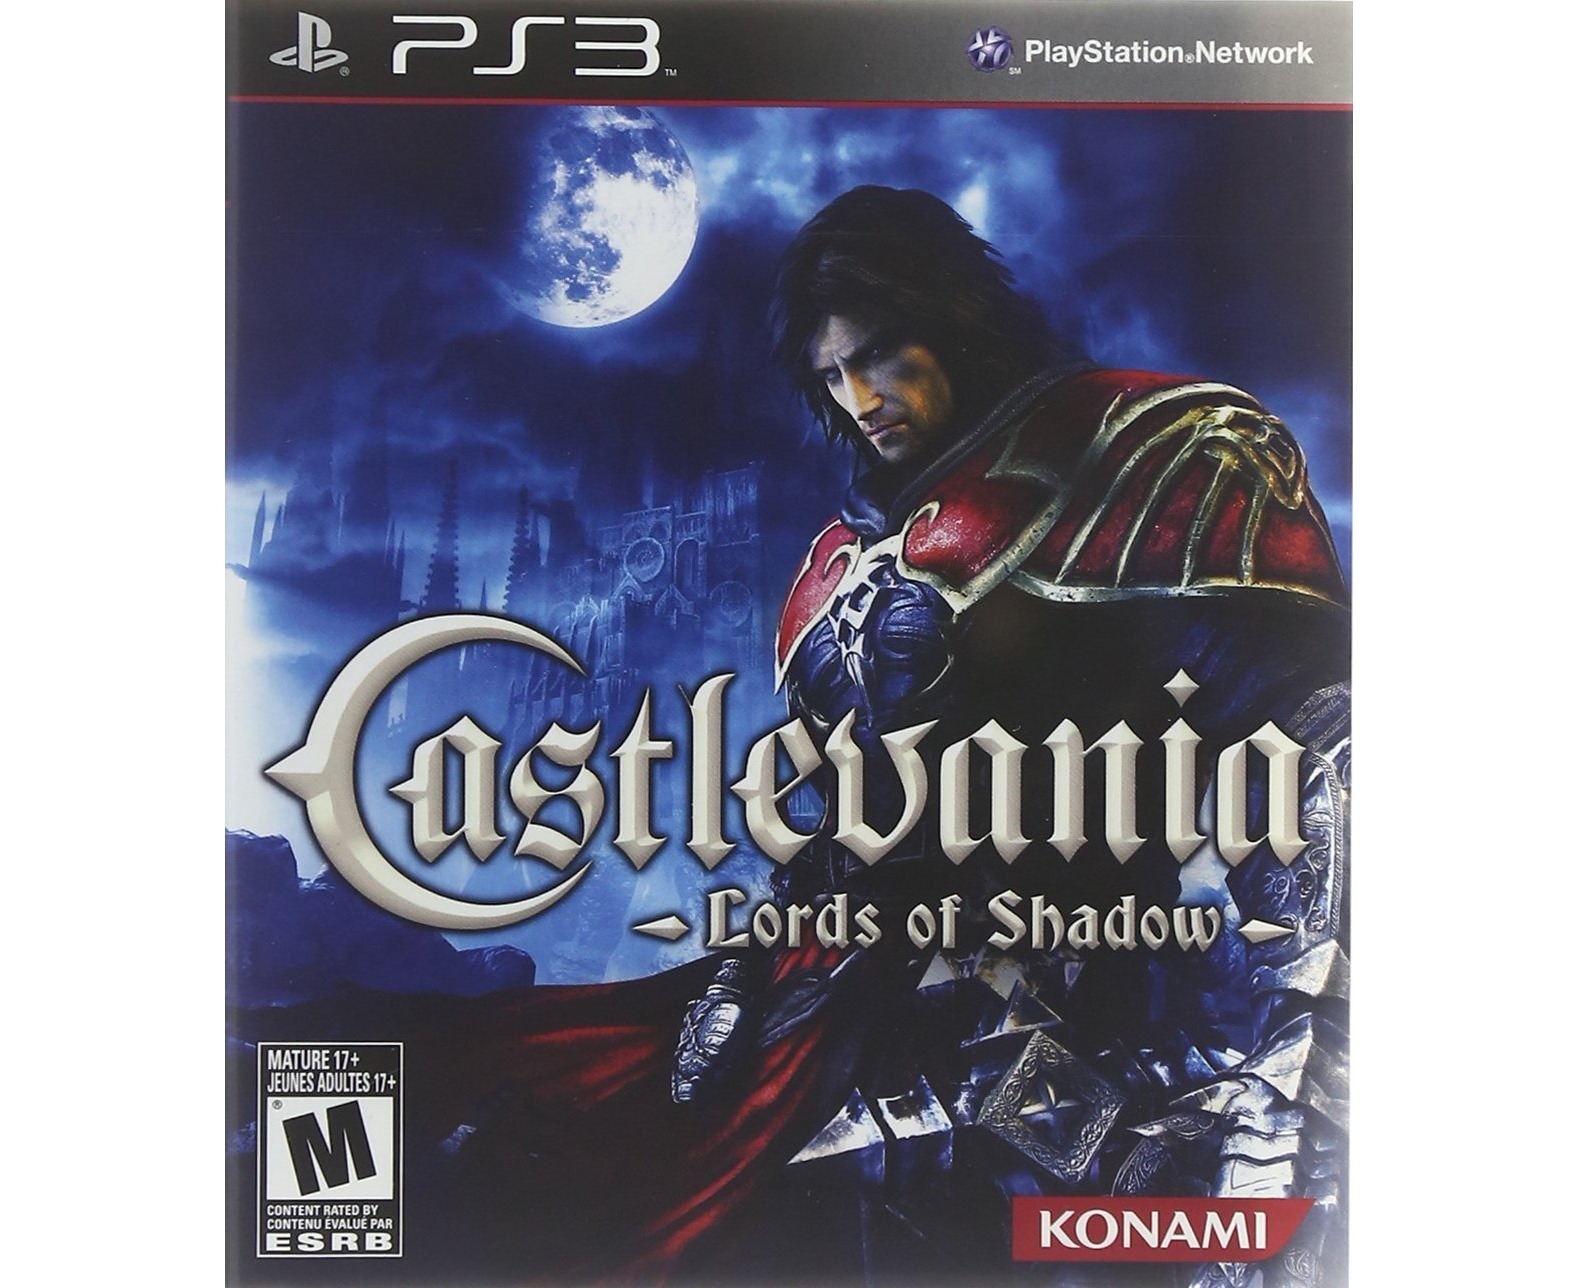 Castlevania: Lords Of Shadow - Playstation 3